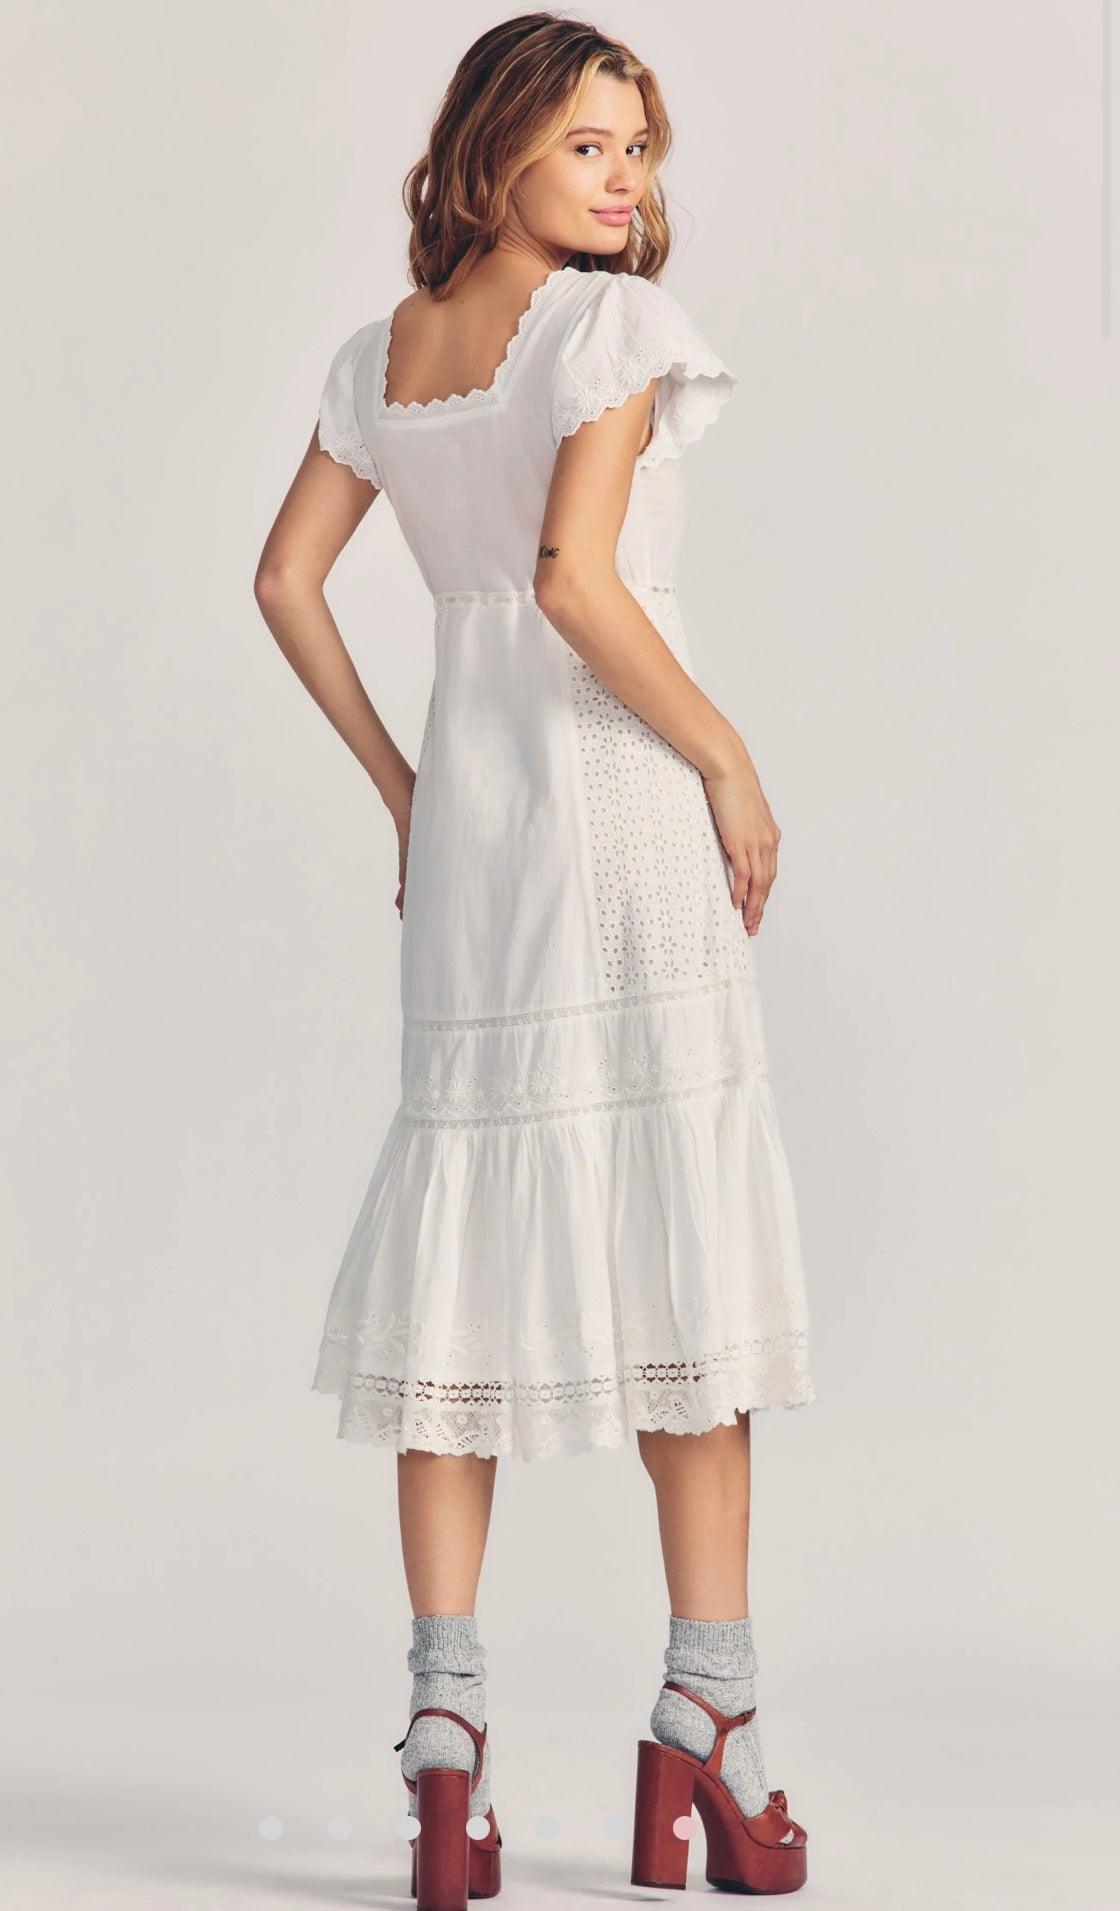 LoveShackFancy - Charles Midi Dress in Eyelet Cotton Antique White - OutDazl